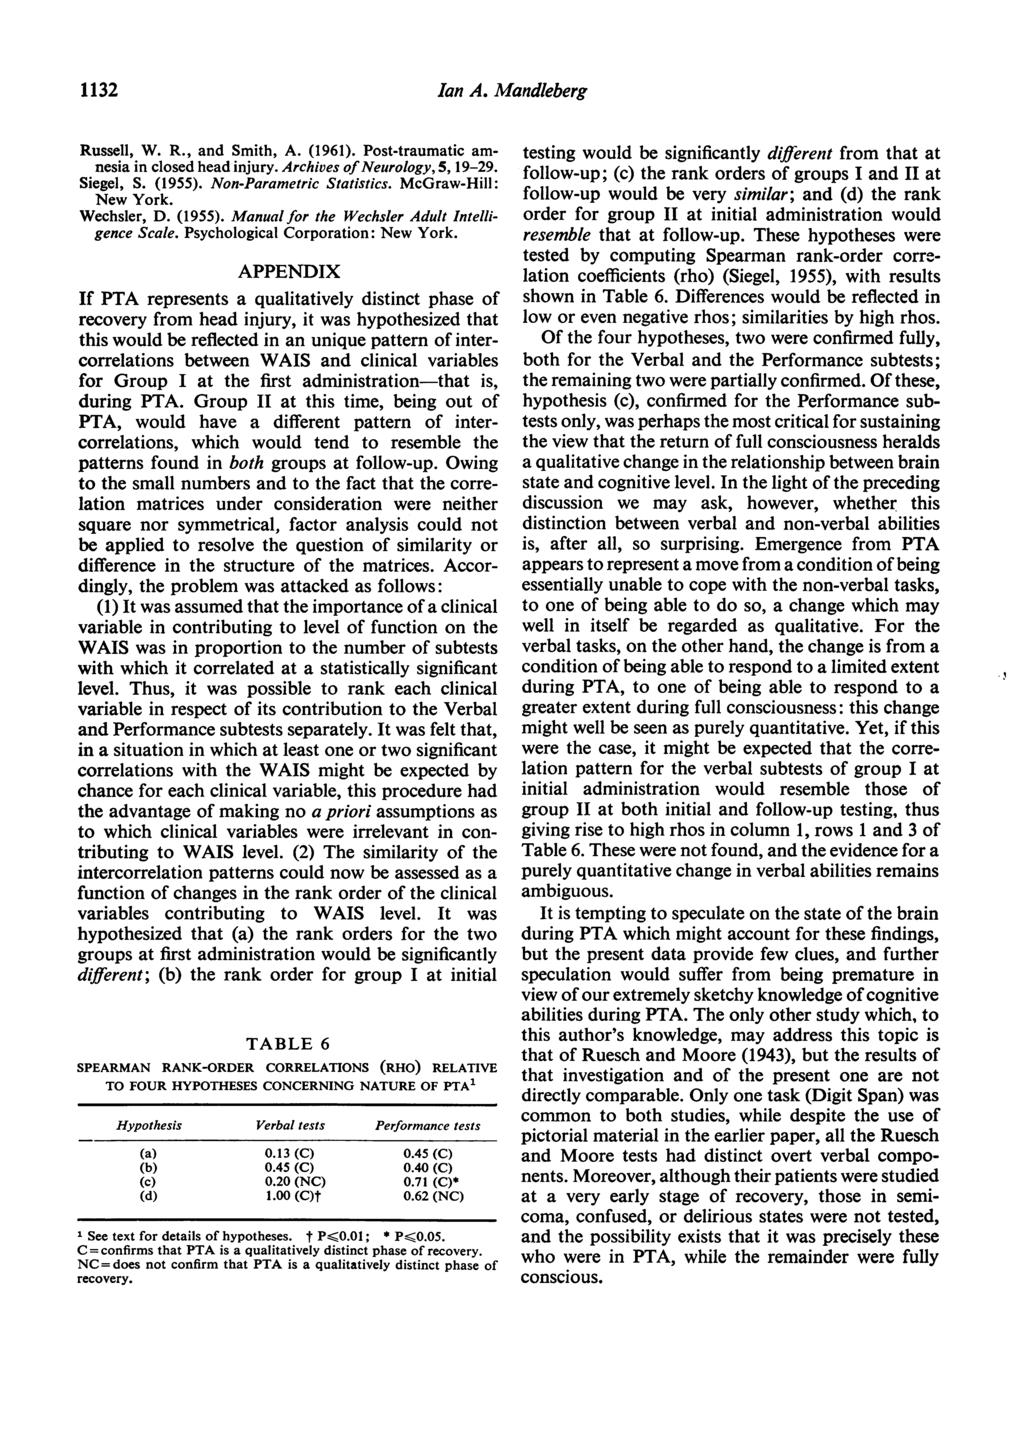 132 Russell, W. R., and Smith, A. (1961). Post-traumatic amnesia in closed head injury. Archives ofneurology, 5, 19-29. Siegel, S. (1955). Non-Parametric Statistics. McGraw-Hill: New York.